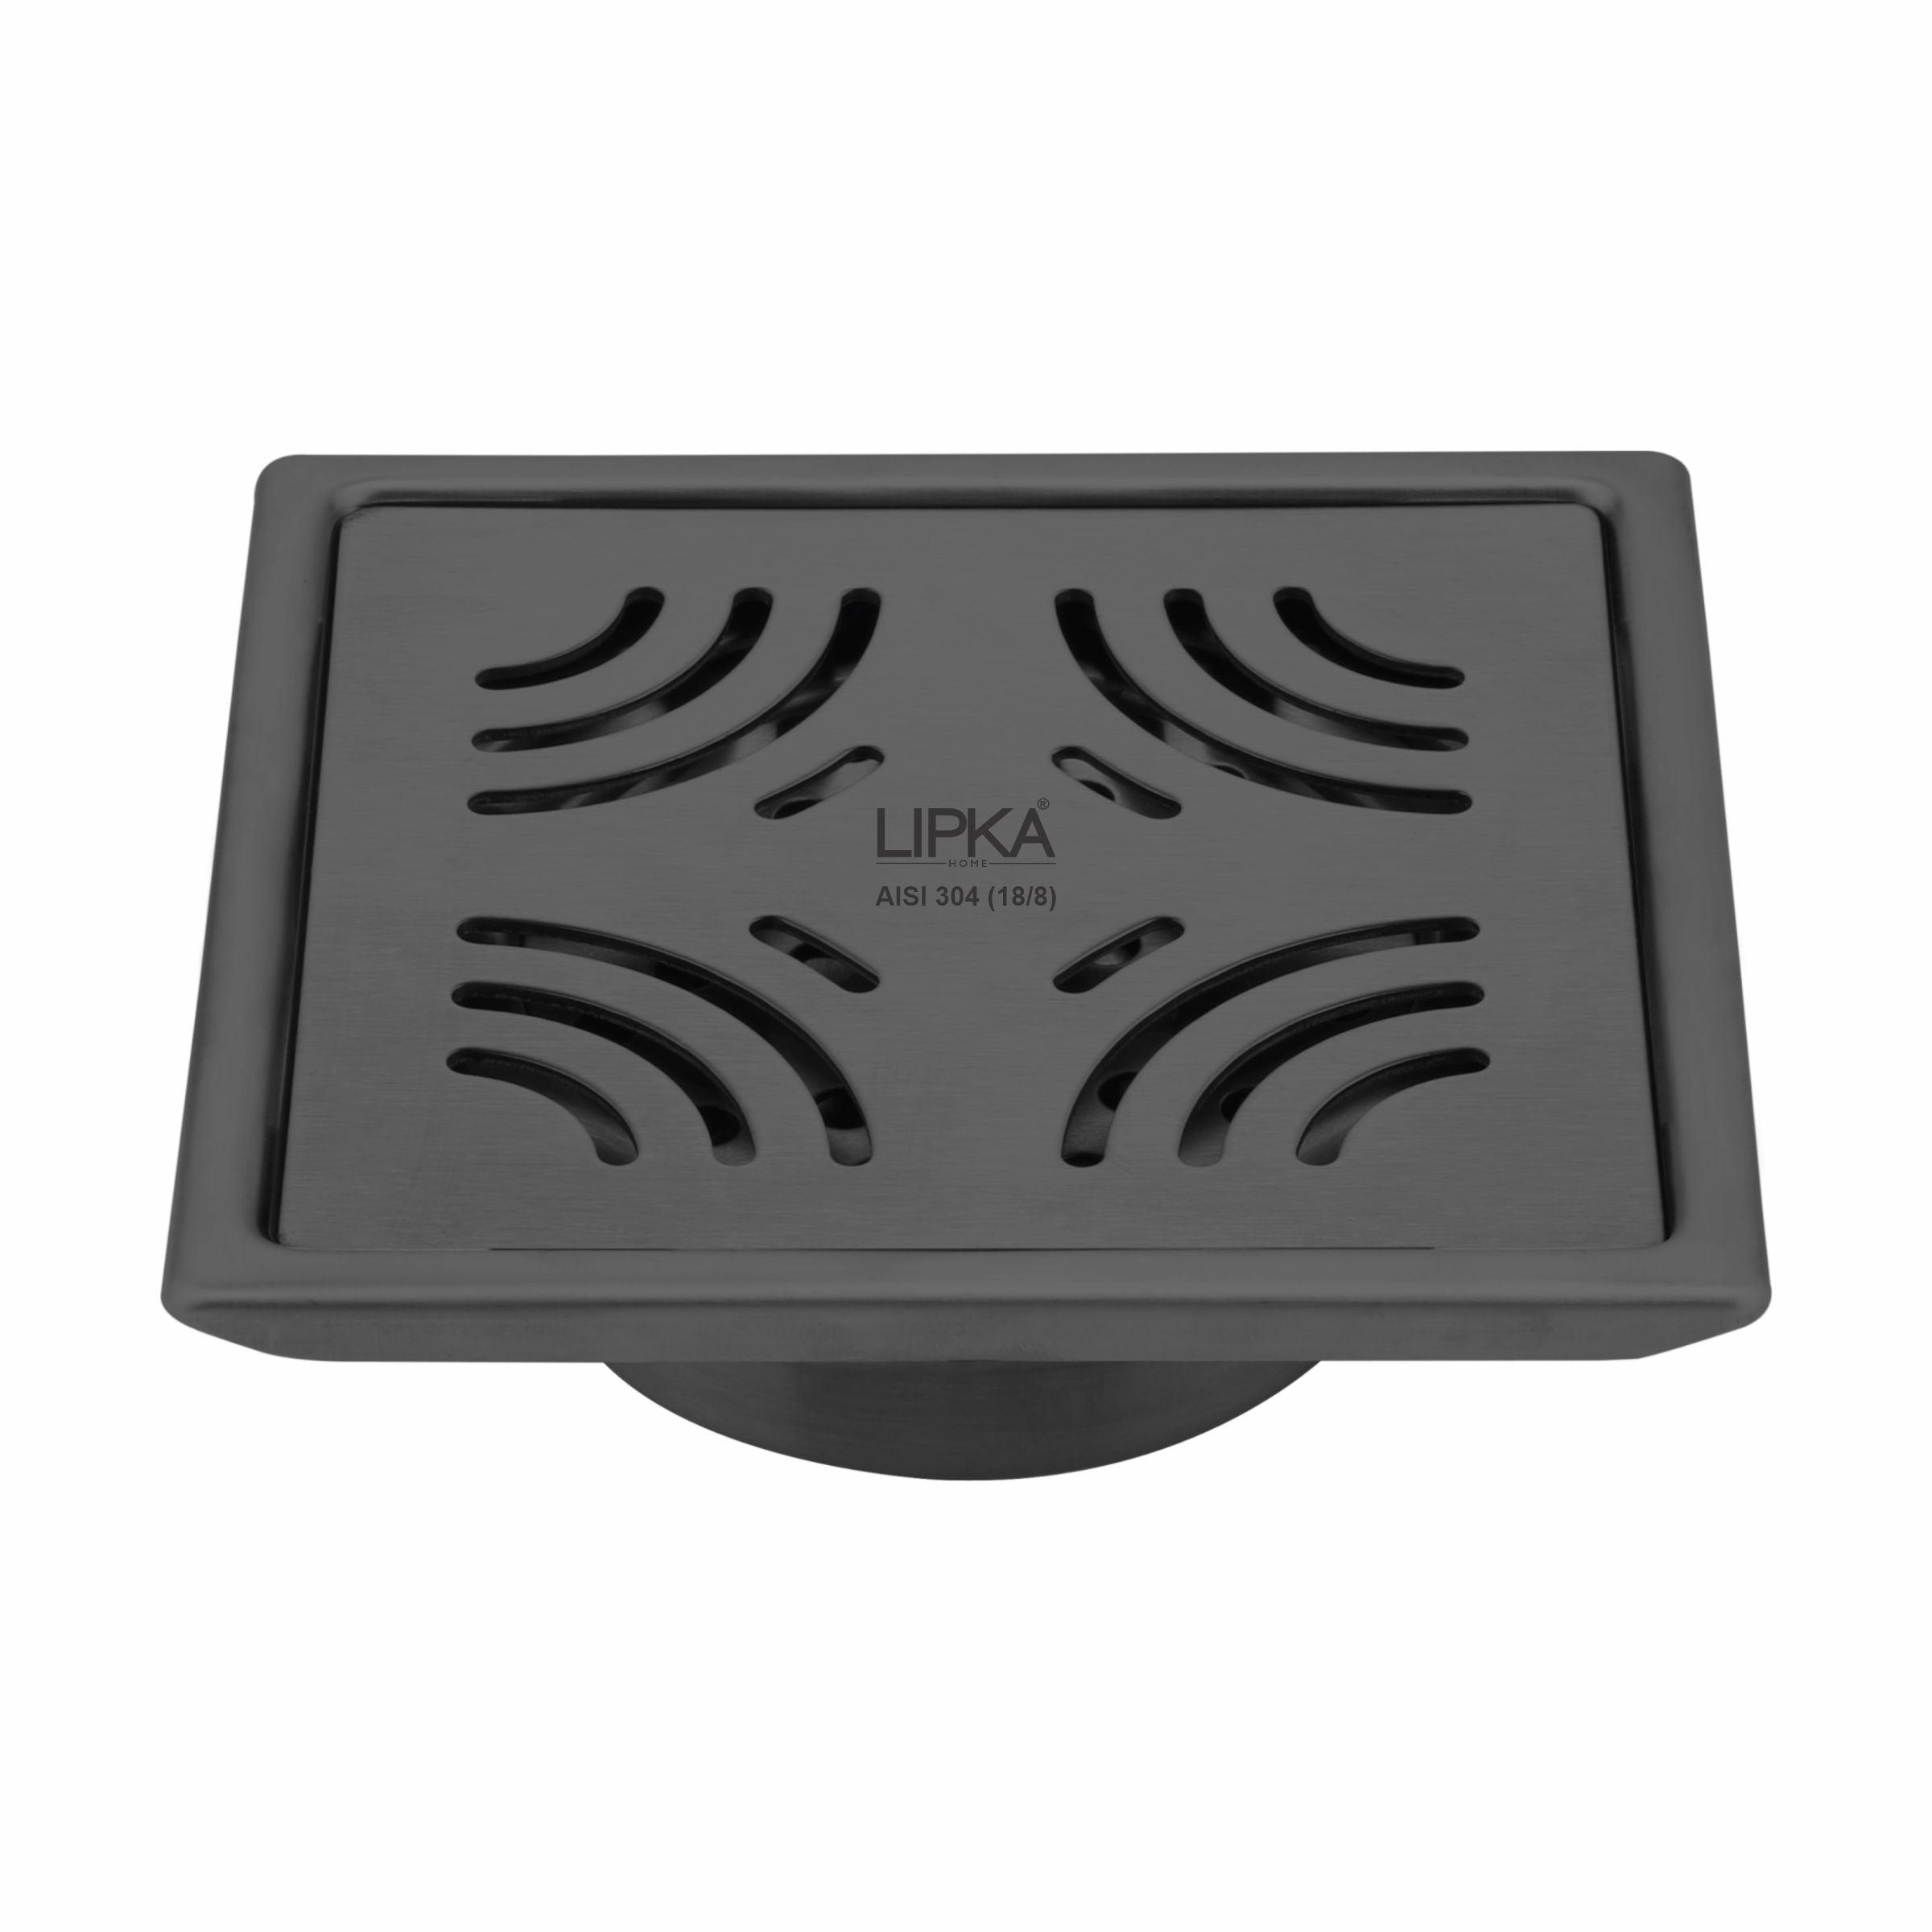 Purple Exclusive Square Floor Drain in Black PVD Coating (5 x 5 Inches) with Cockroach Trap